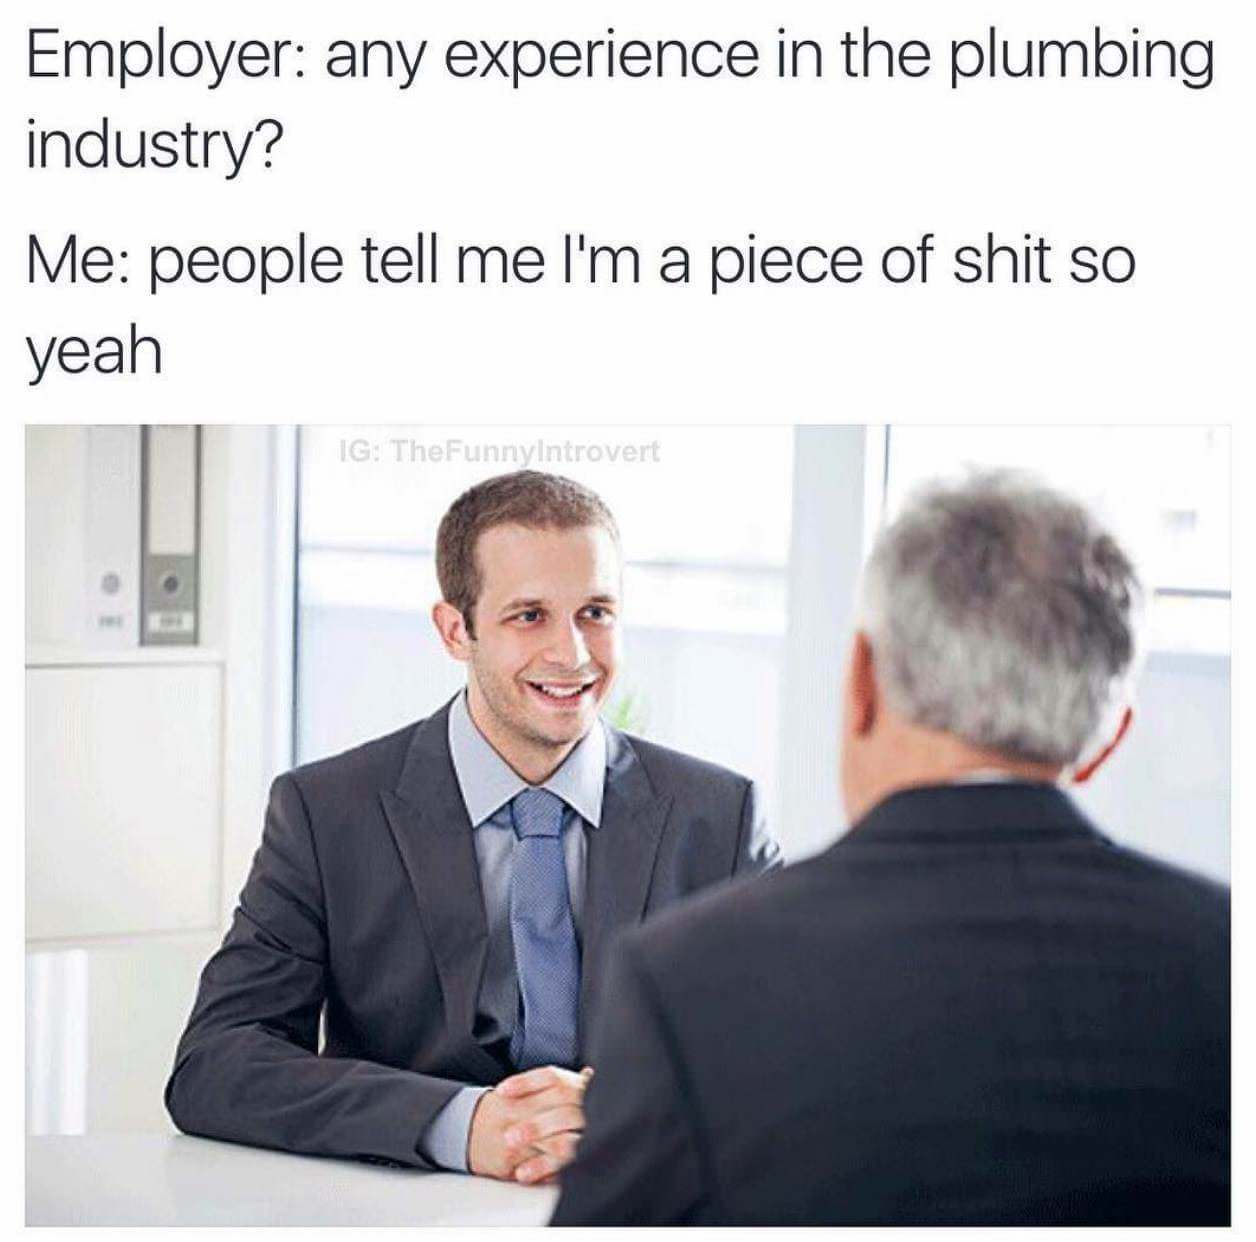 what's your biggest weakness meme - Employer any experience in the plumbing industry? Me people tell me I'm a piece of shit so yeah Ig TheFunnylntrovert